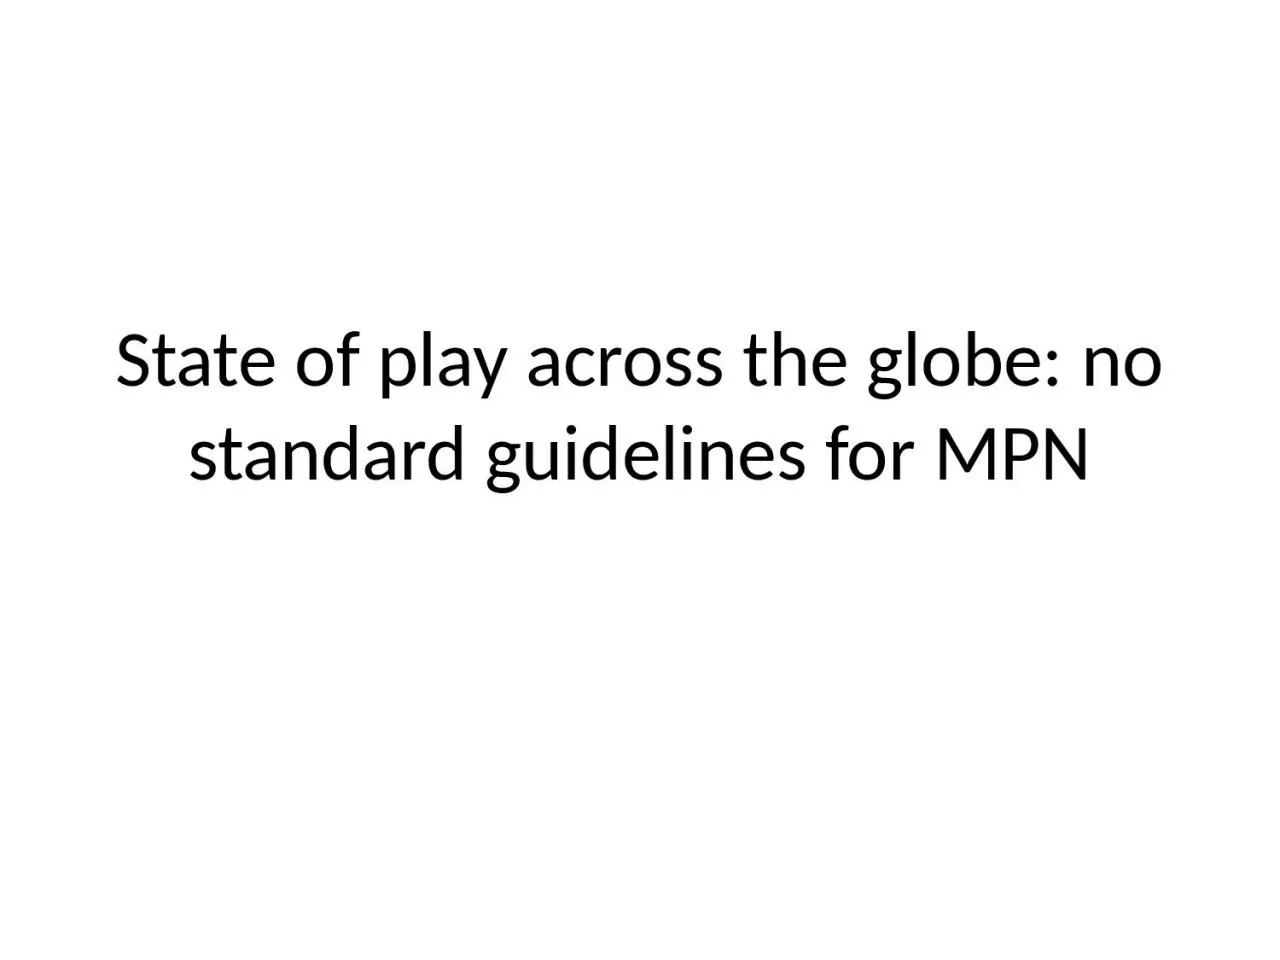 State of play across the globe: no standard guidelines for MPN